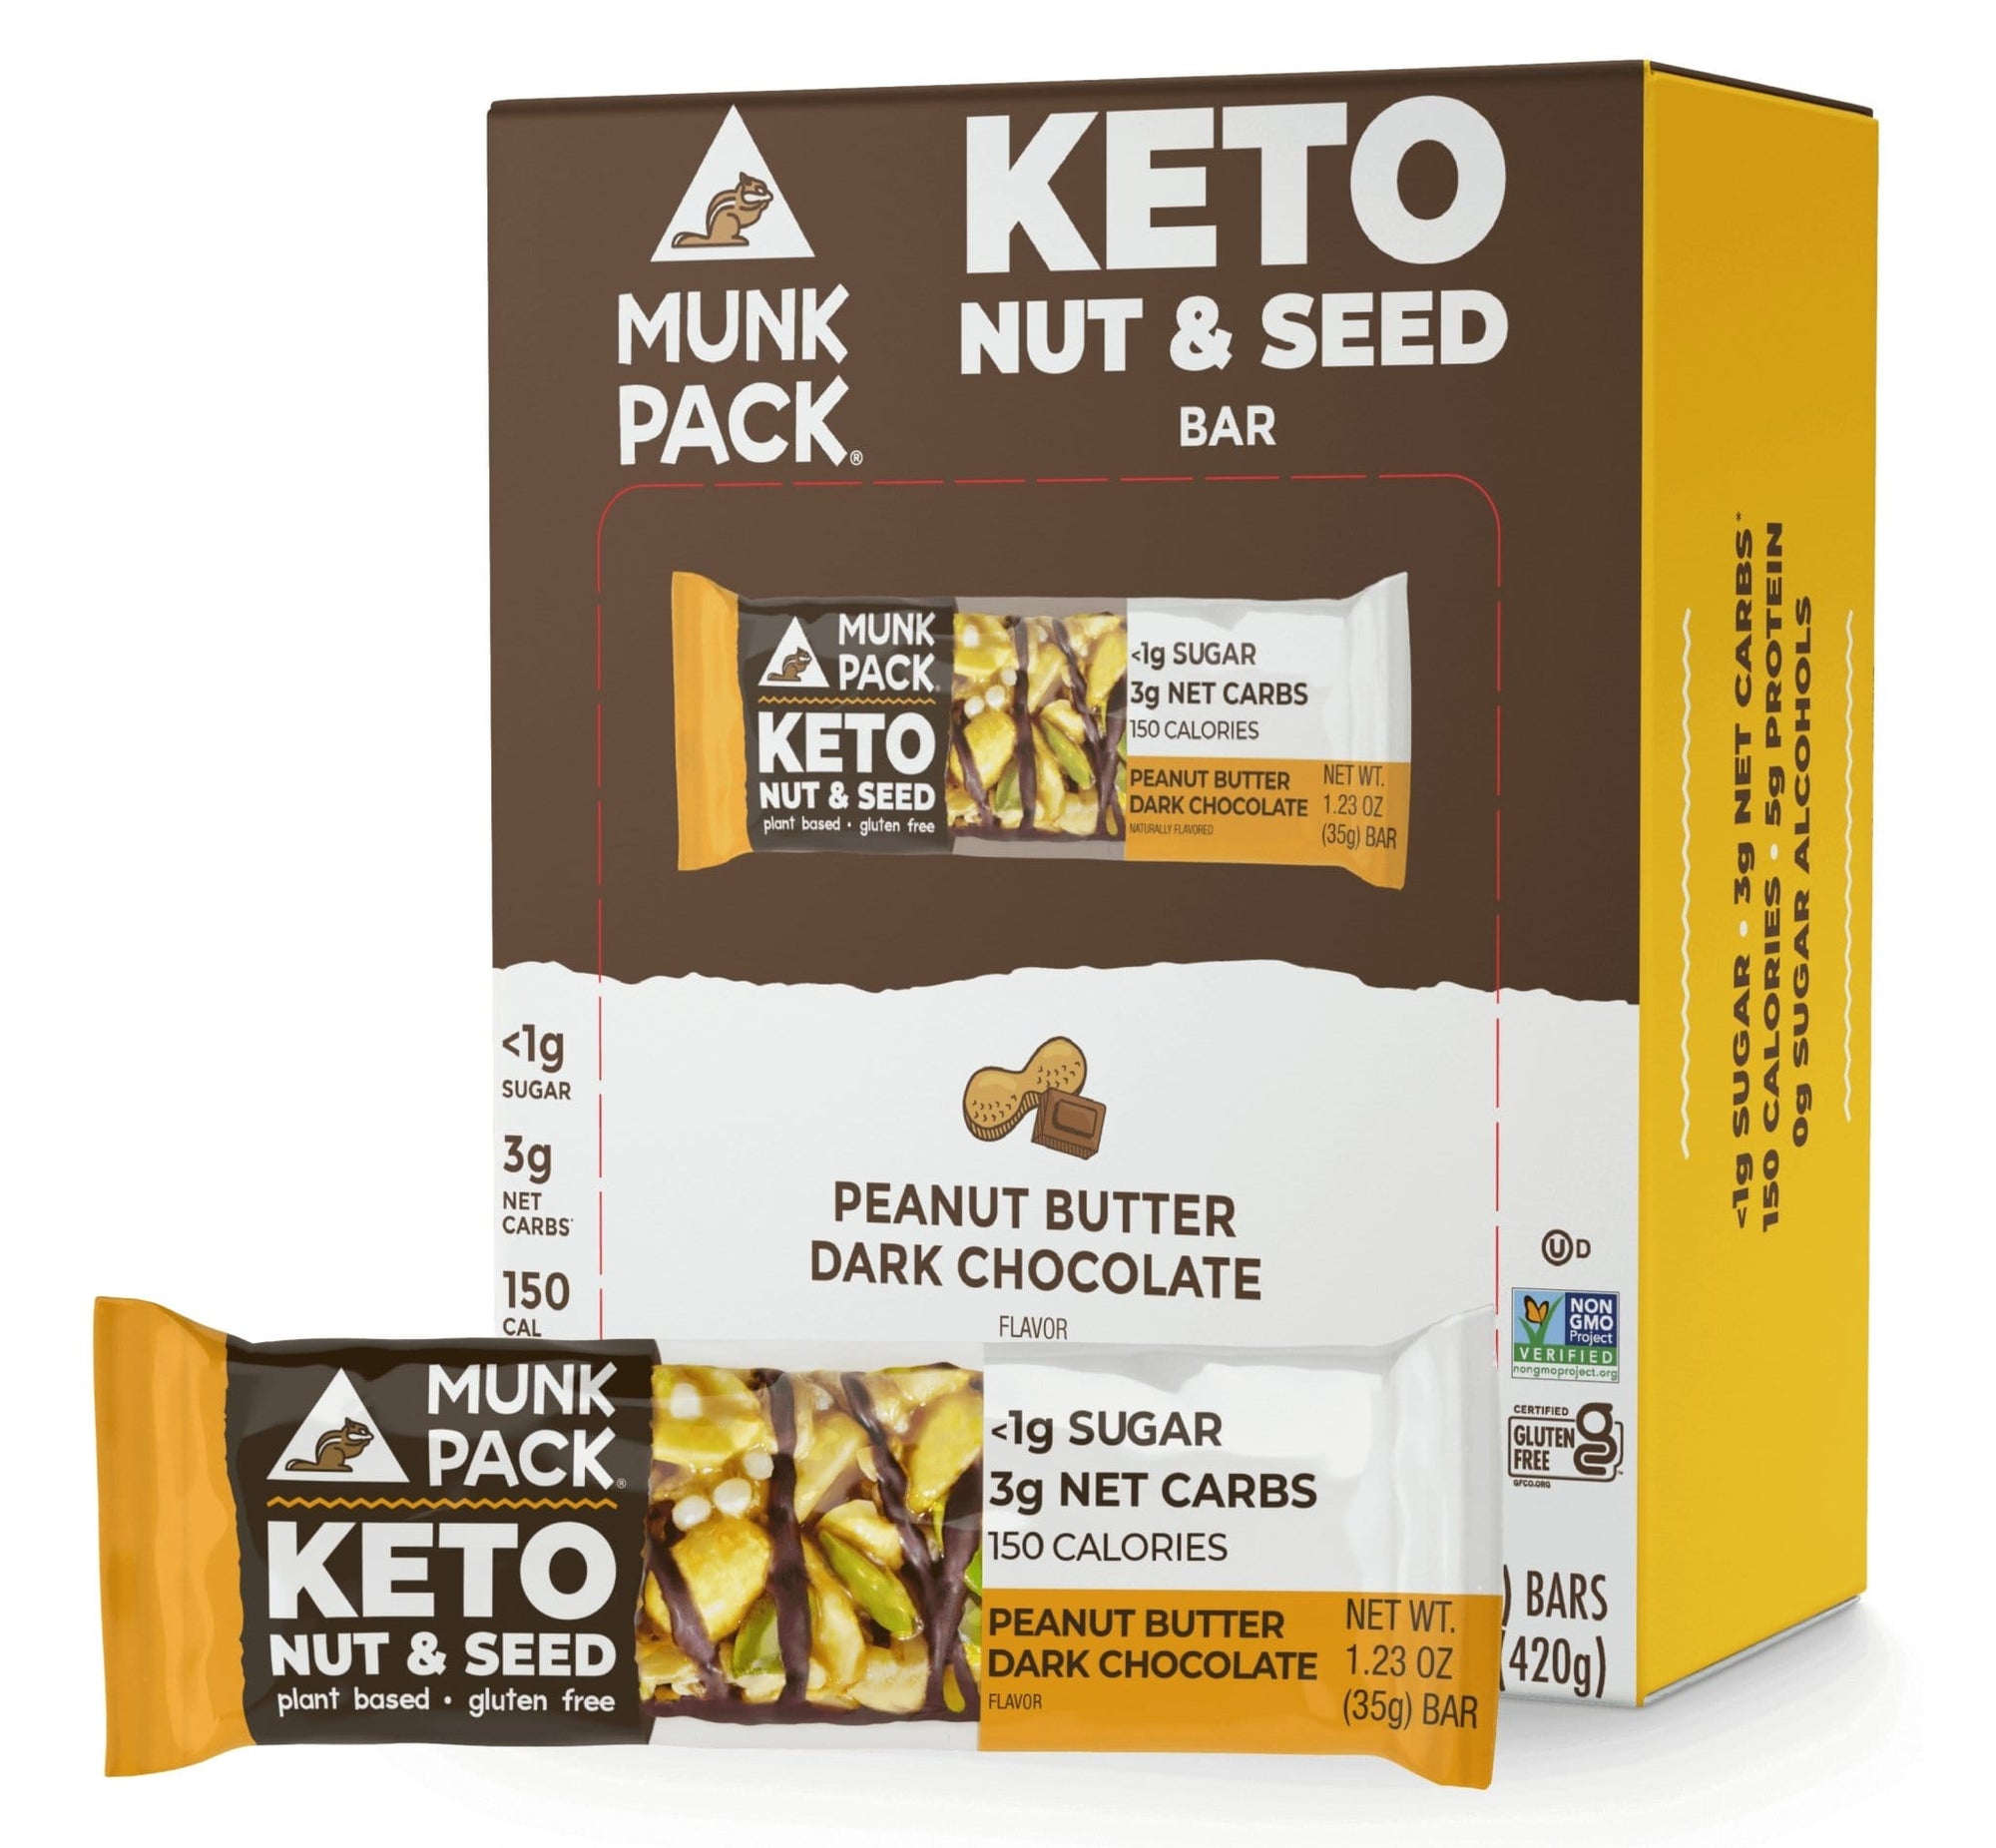 Peanut Butter Dark Chocolate Keto Nut & Seed Bar, 12-Pack exclusive at